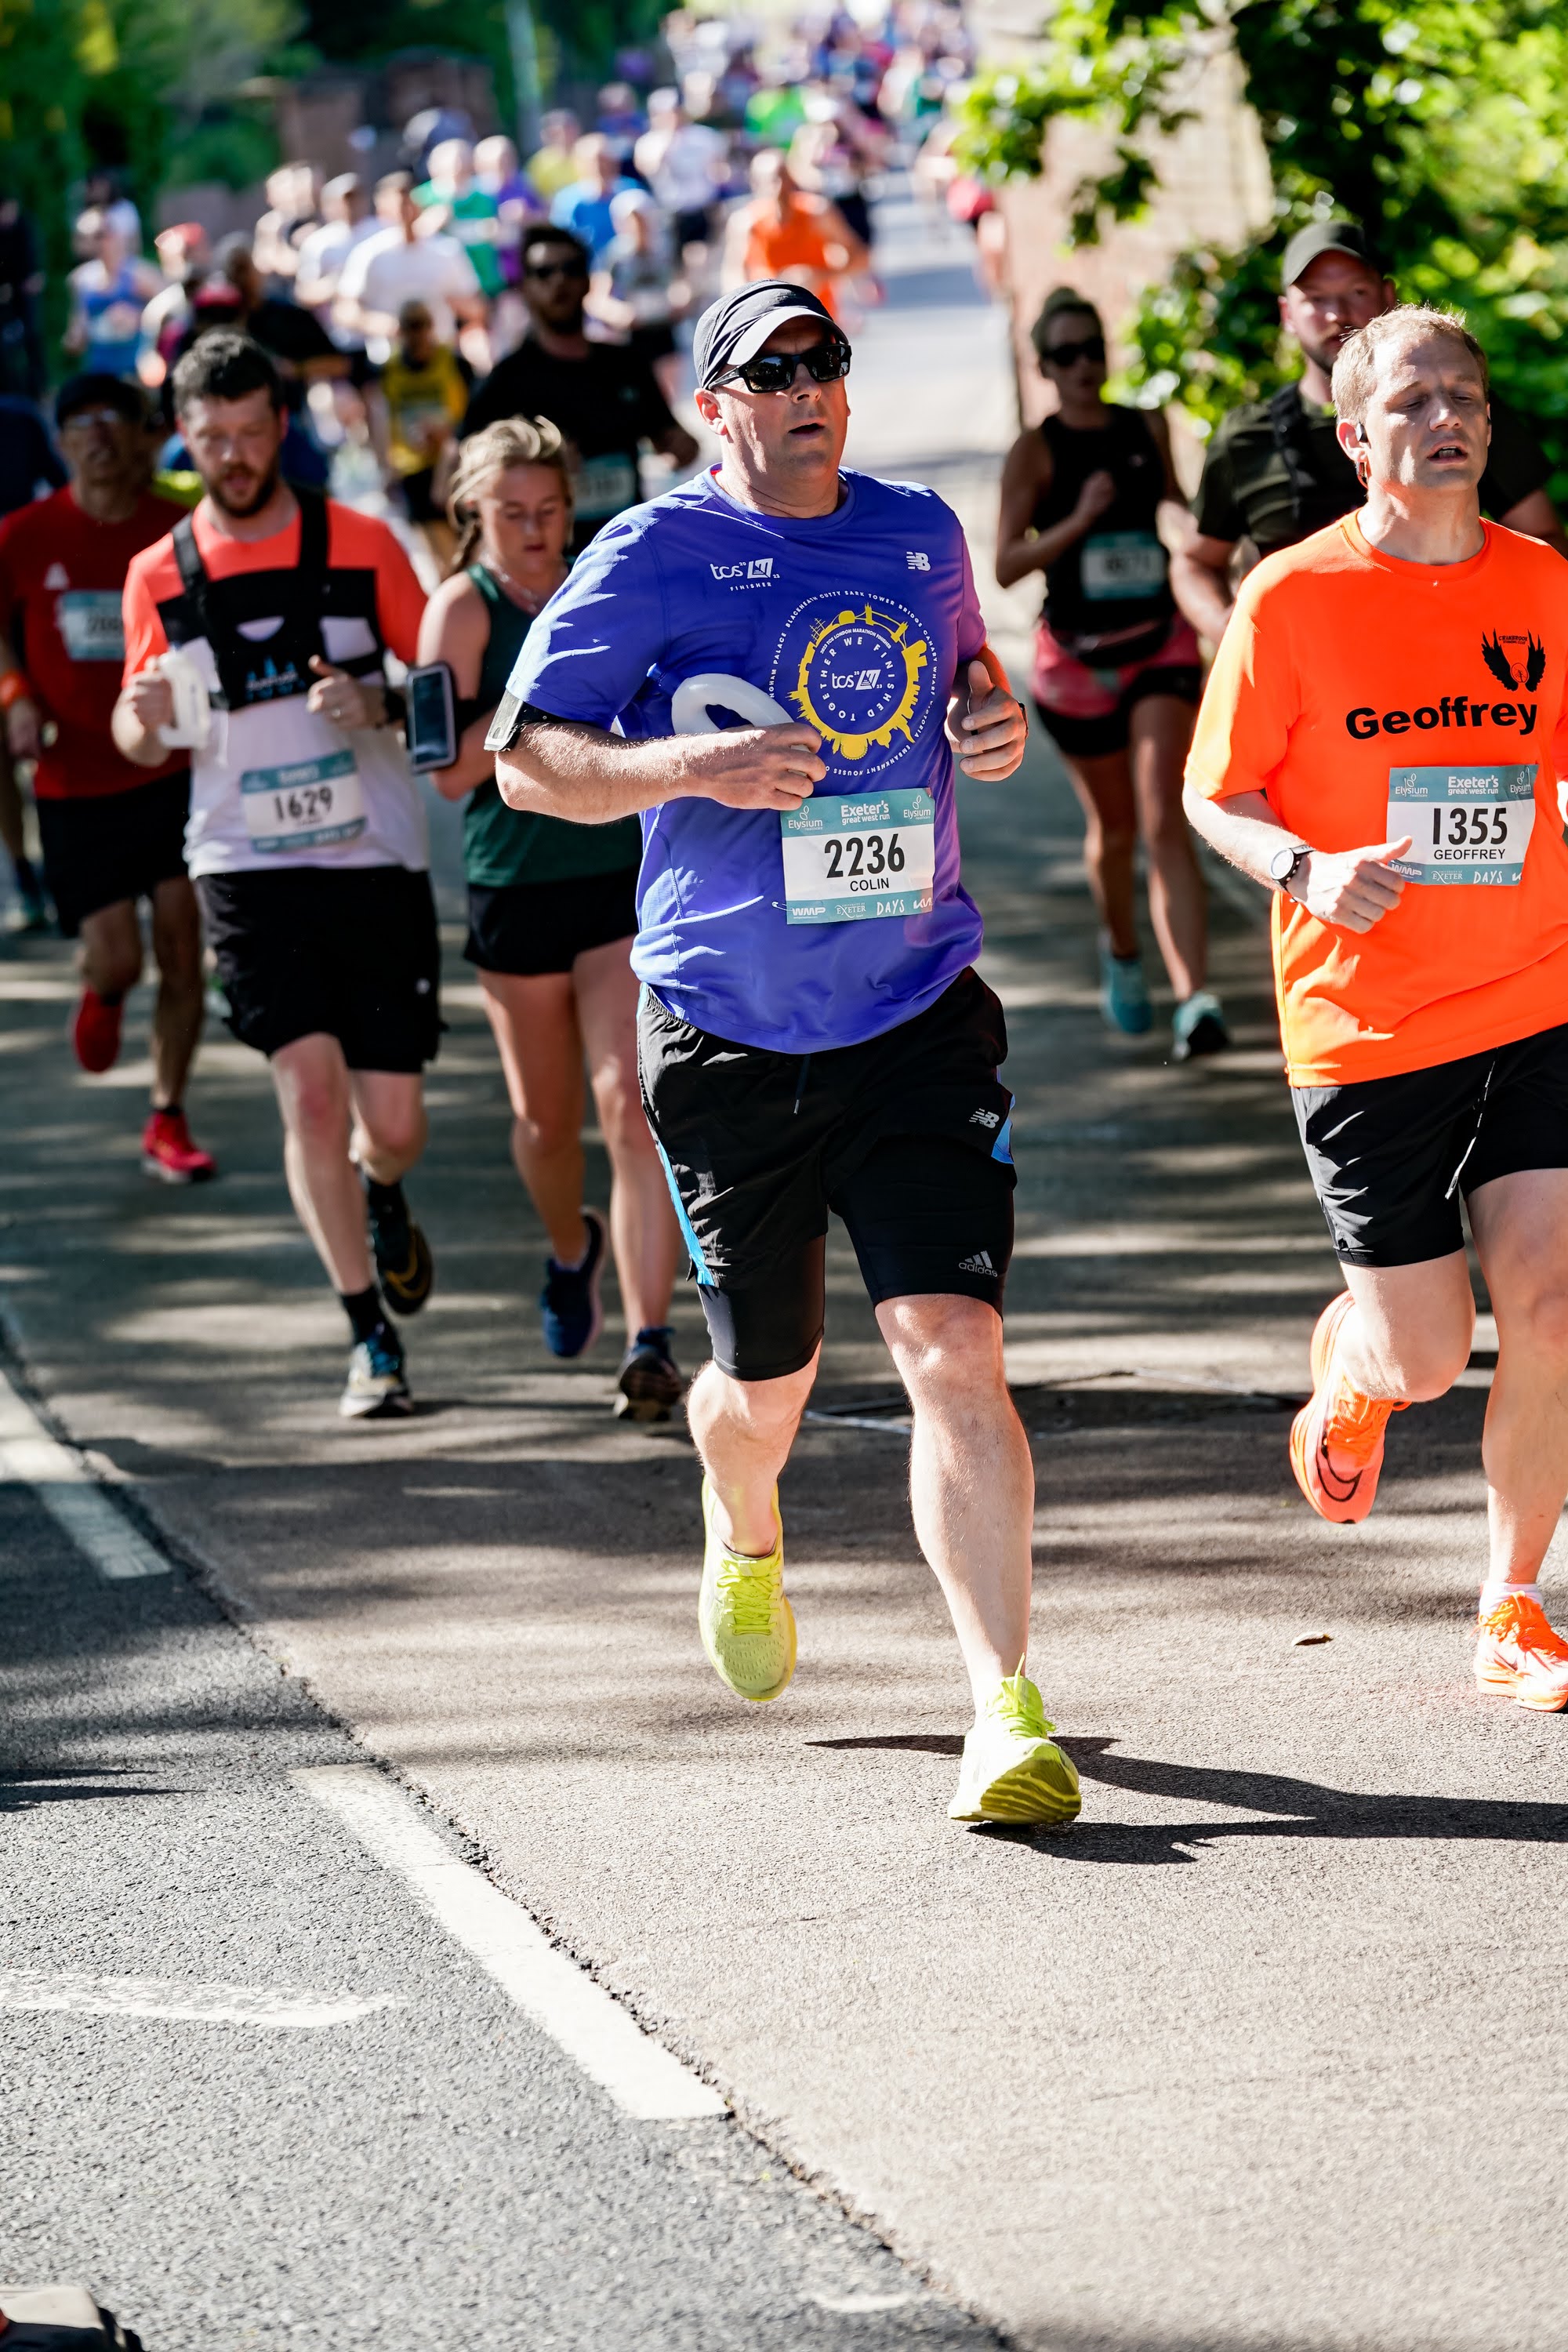 A photo of Geoffrey Hayward and other runners out running at the Great West Run.